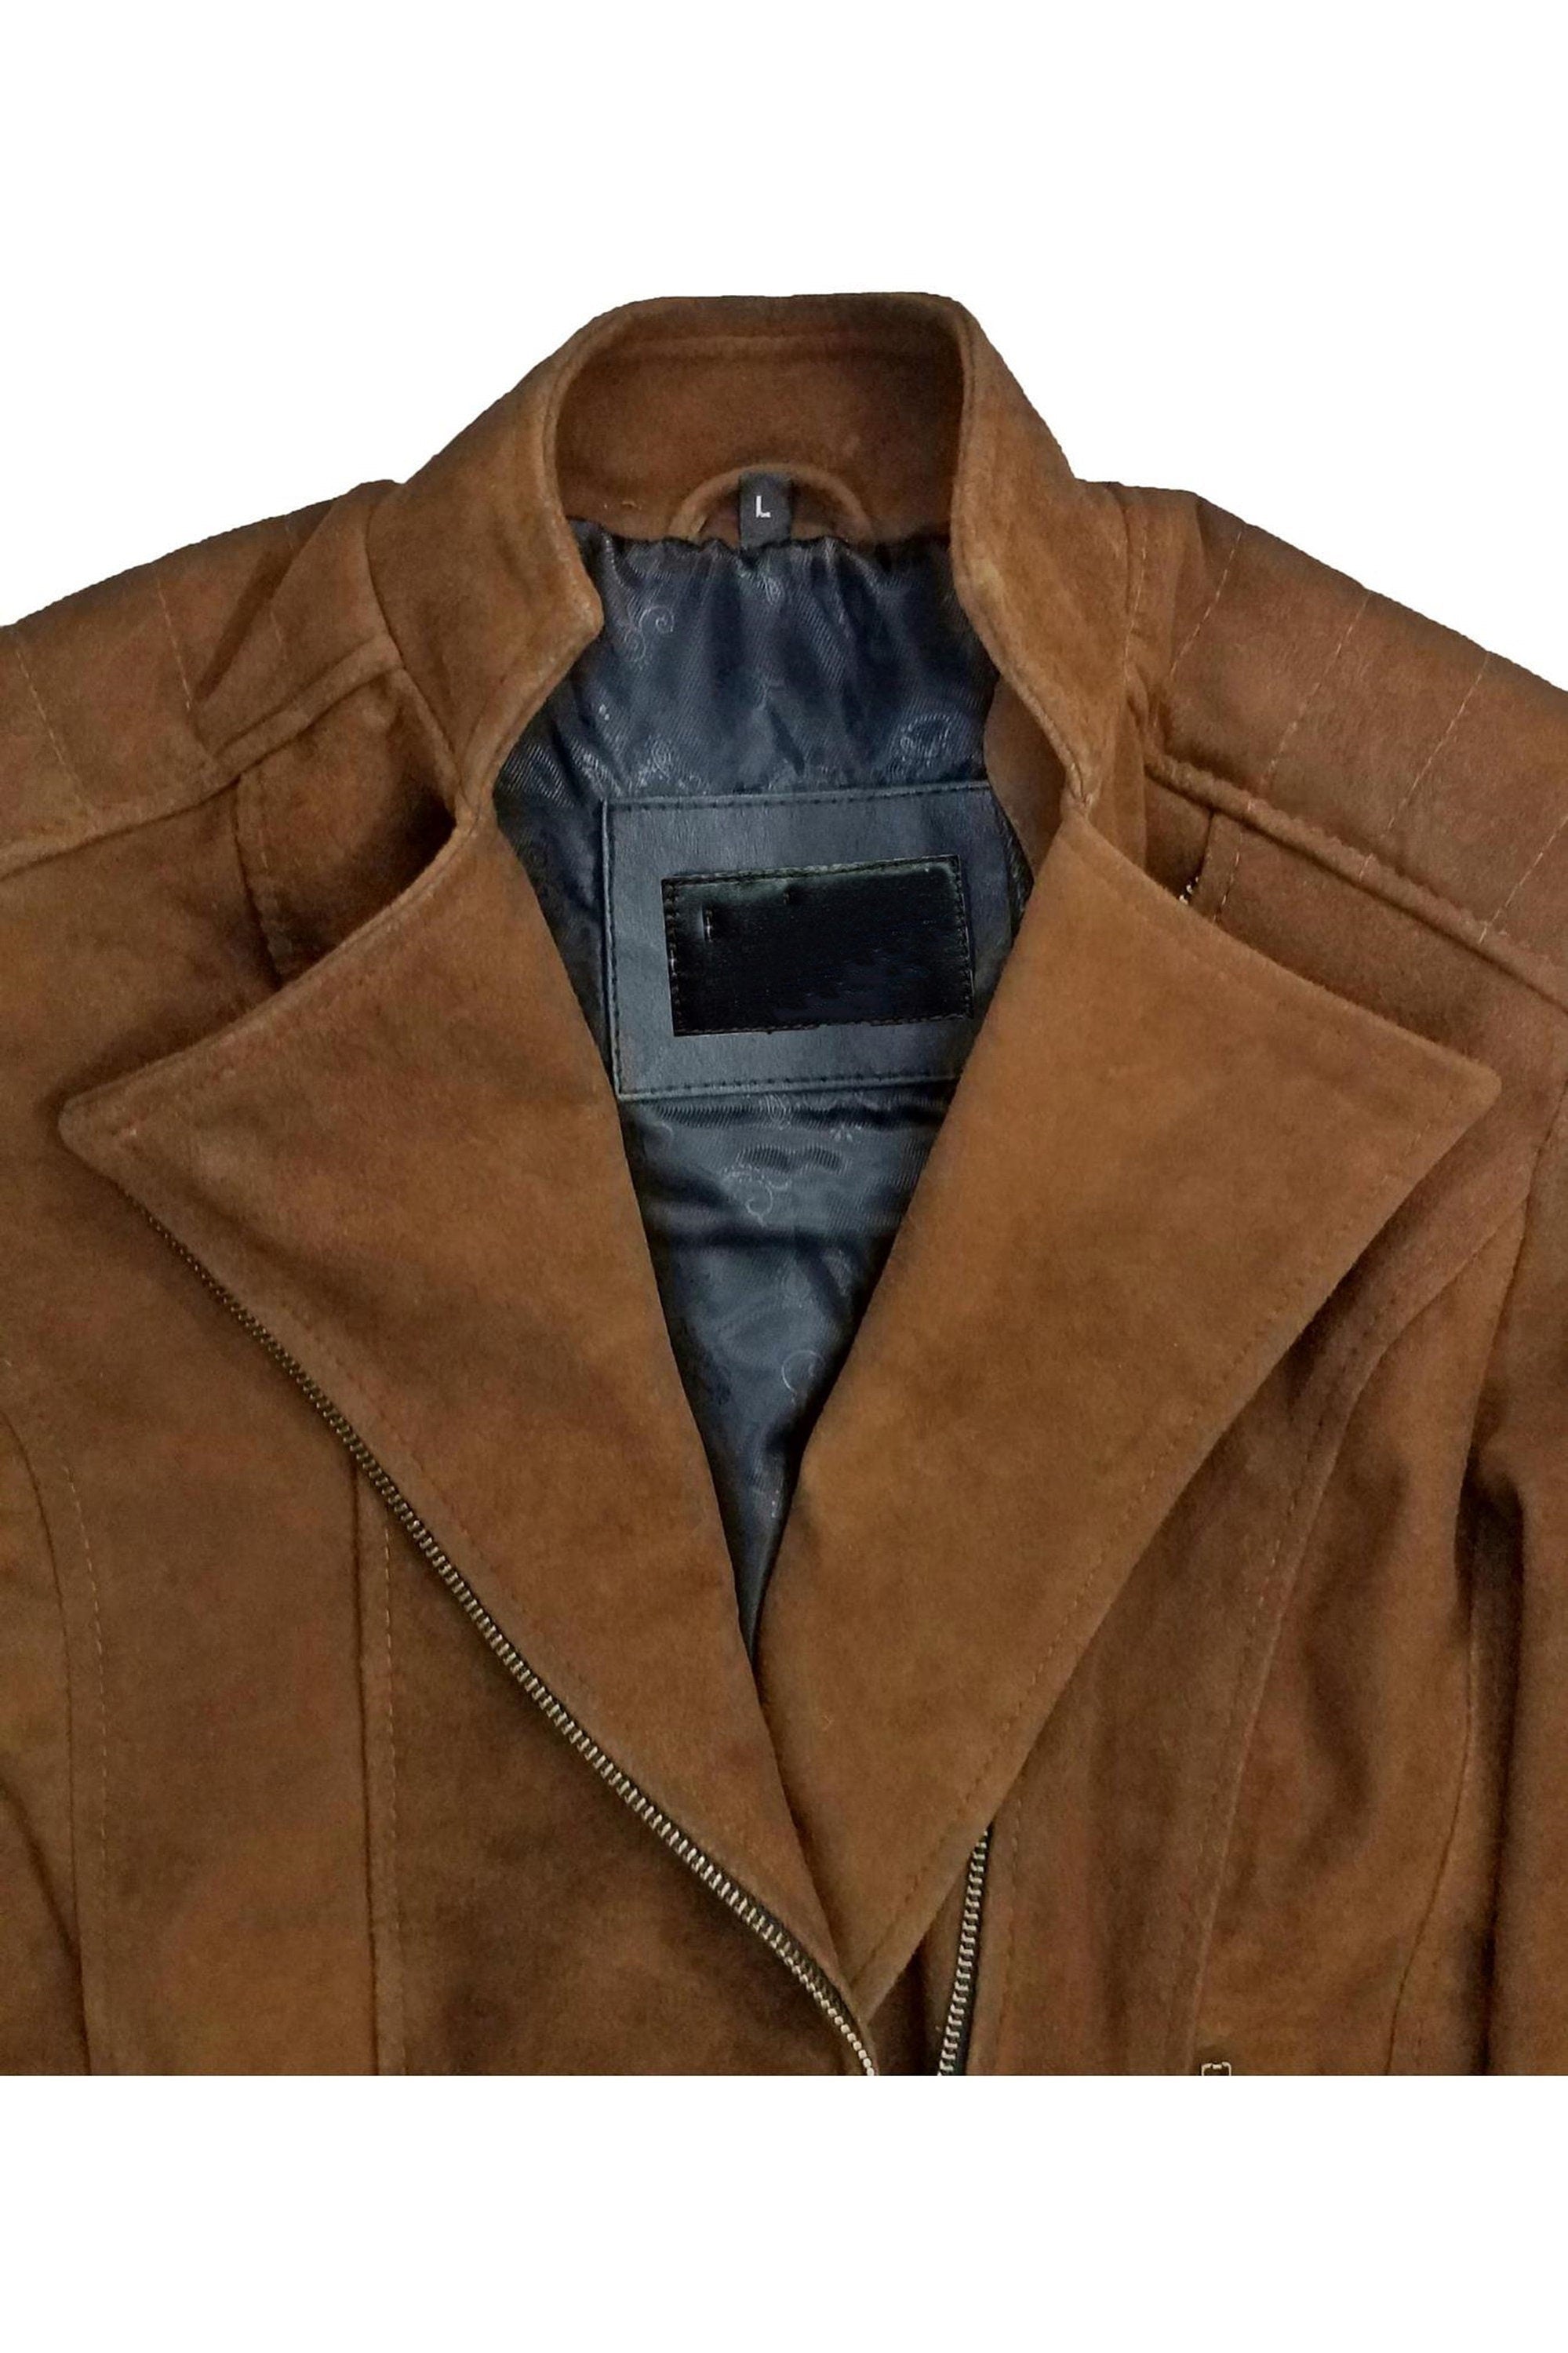 Womens Tan Suede Leather Jacket